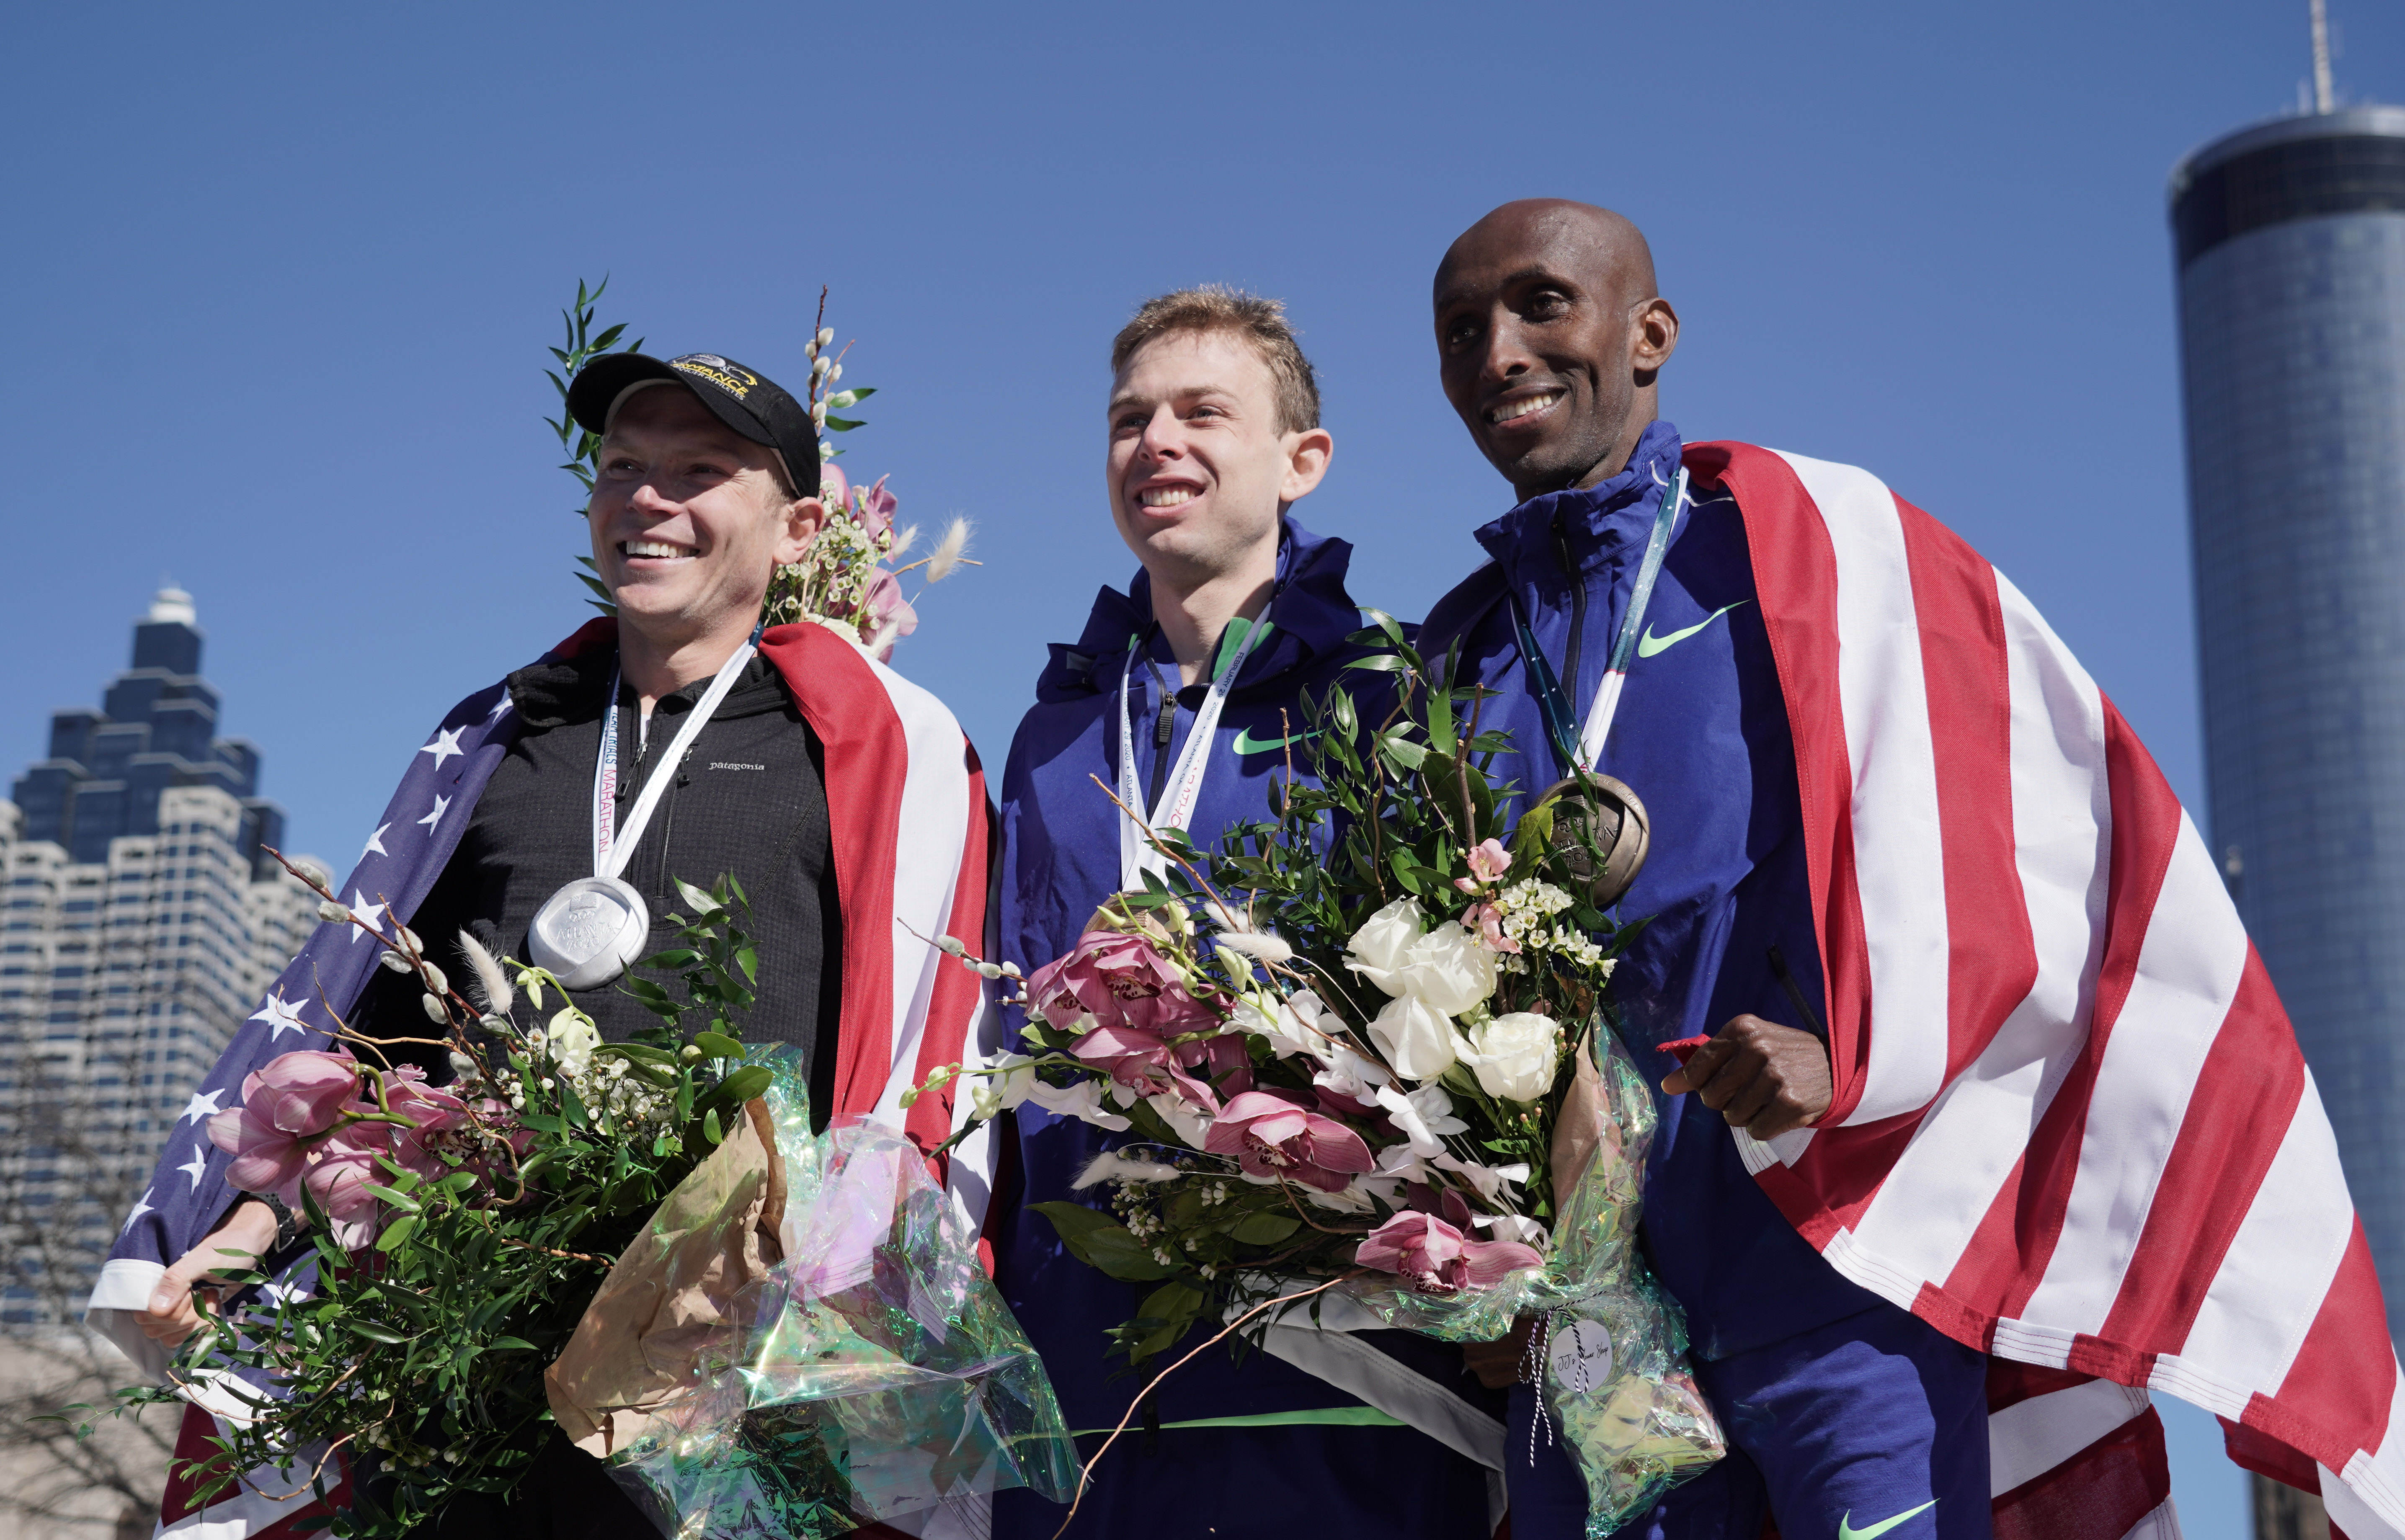 Feb 29, 2020; Atlanta, Georgia, USA; Men's winner Galen Rupp (center), runner-up Jacob Riley (left) and third-place finisher Abdi Abdirahman pose with Untied States flags afterthe US Olympic Team Trials marathon. Mandatory Credit: Kirby Lee-USA TODAY Sports